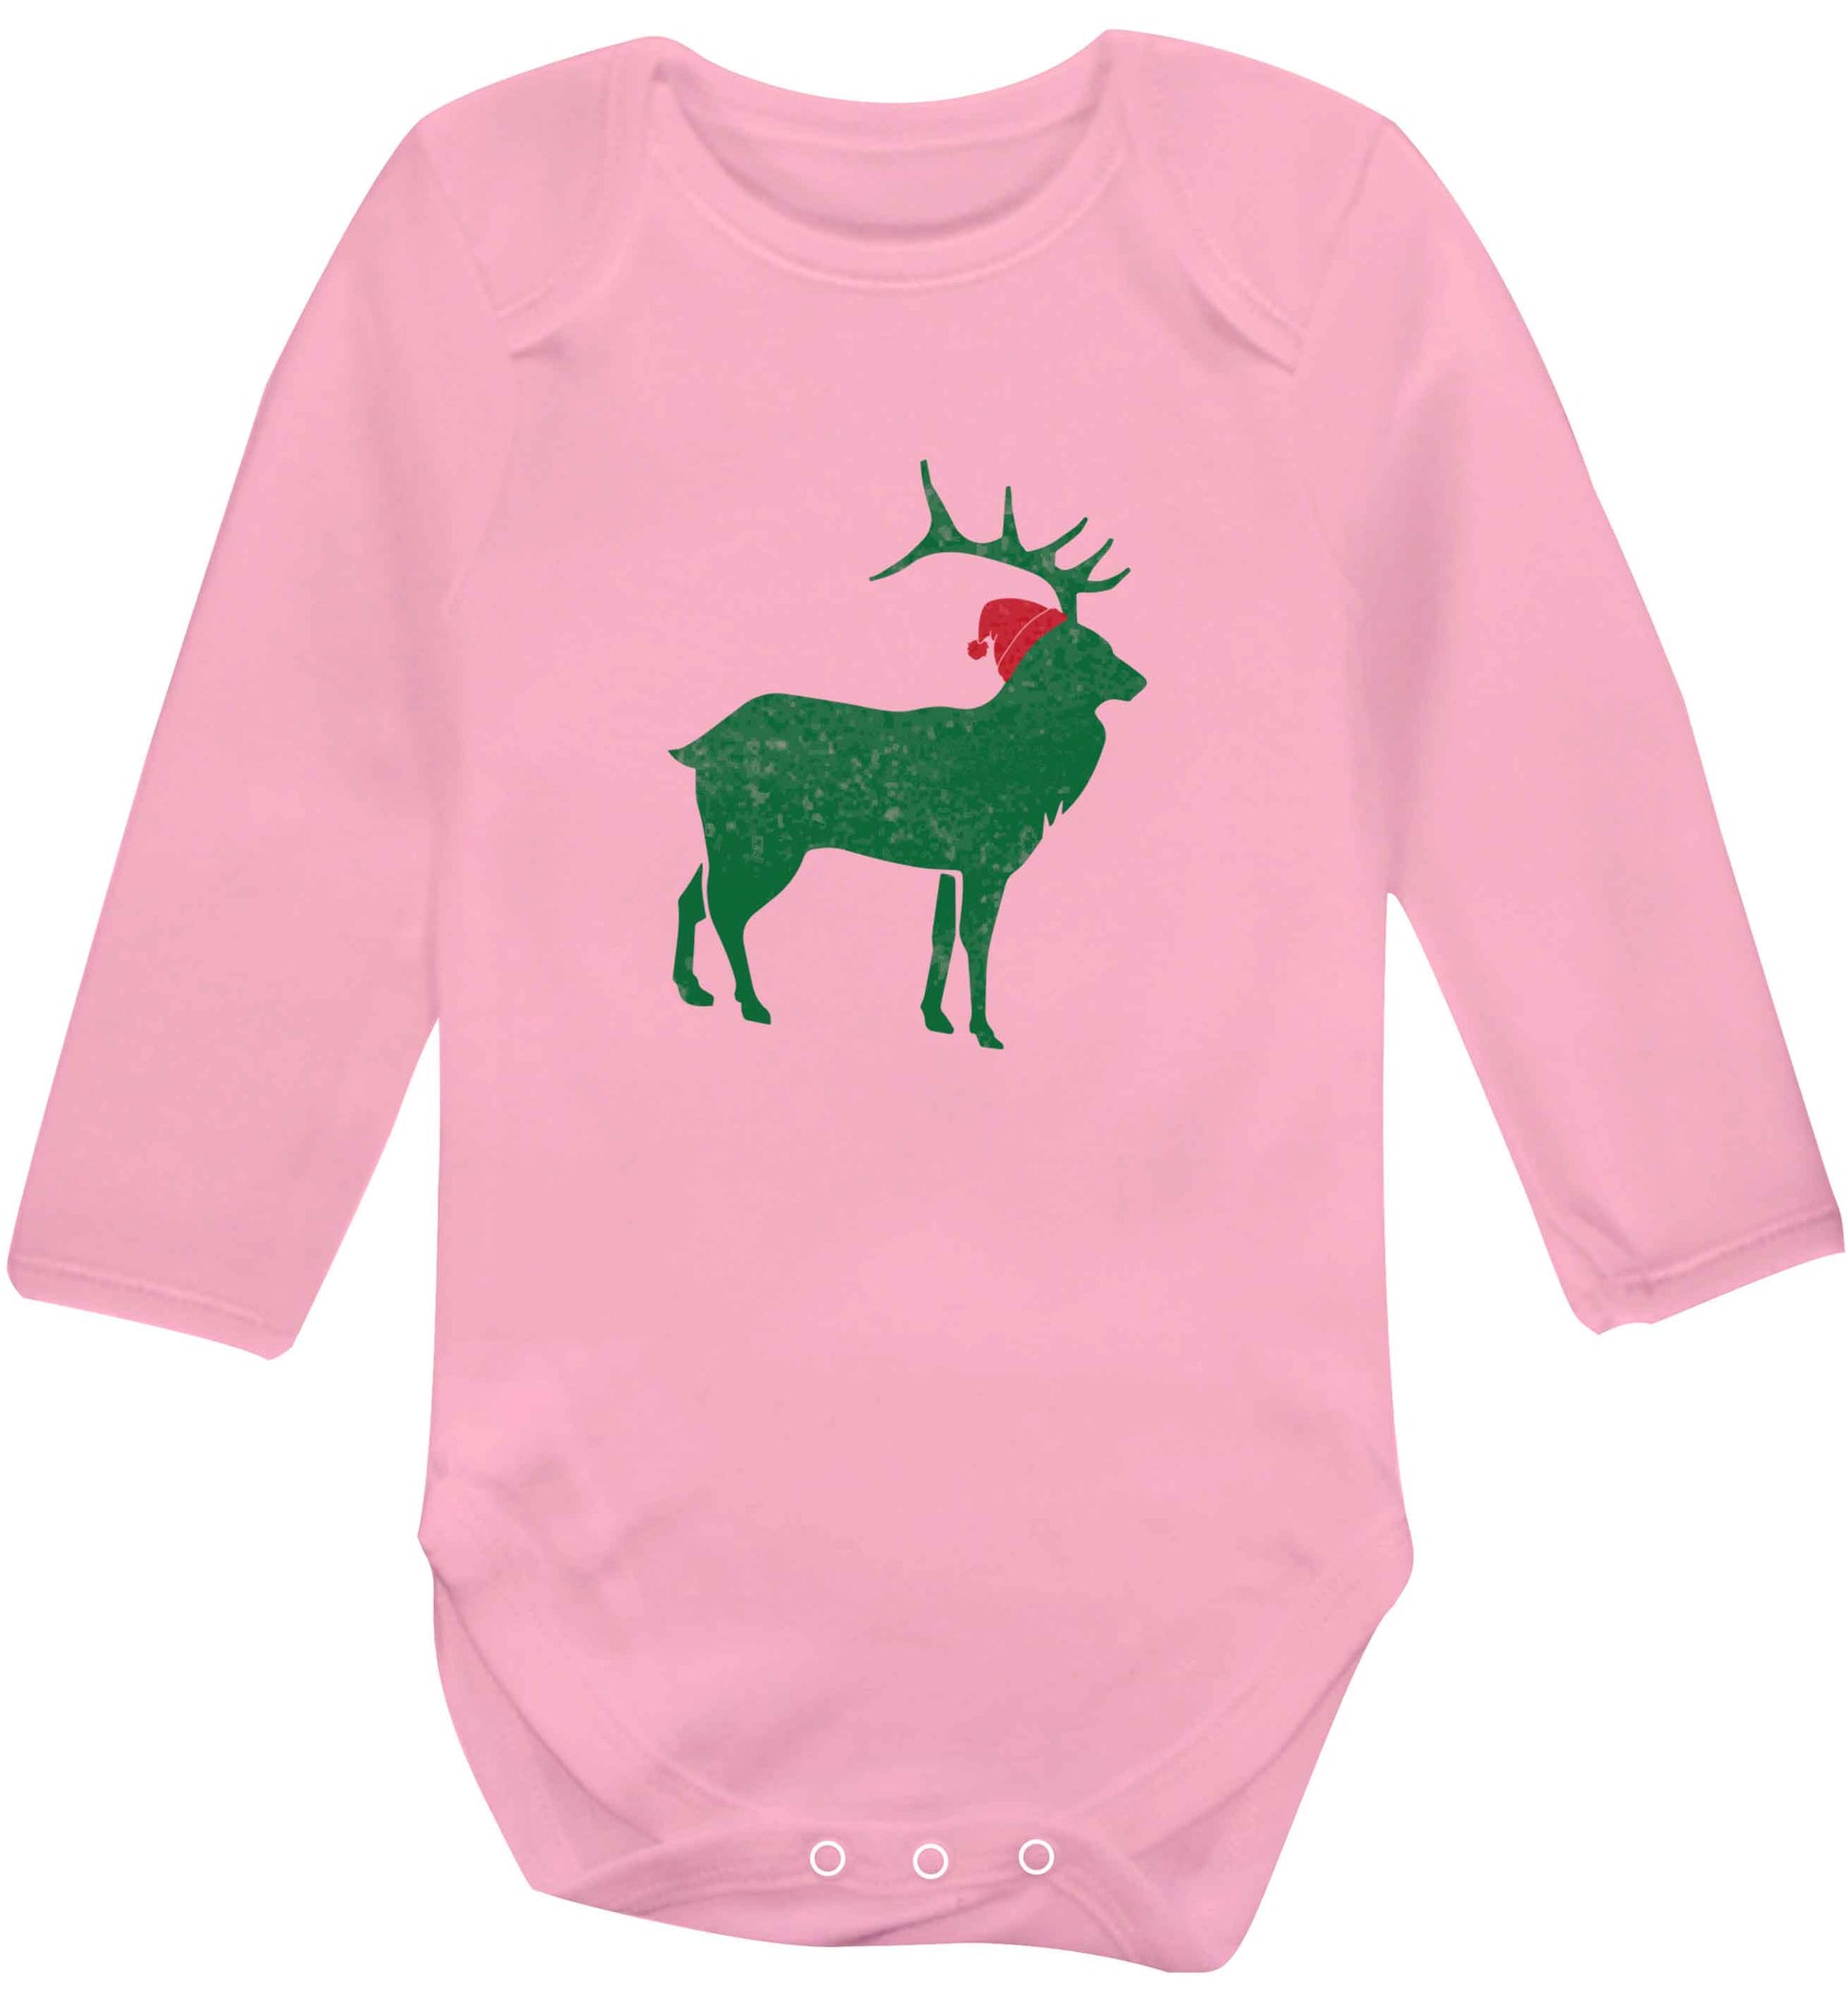 Green stag Santa baby vest long sleeved pale pink 6-12 months